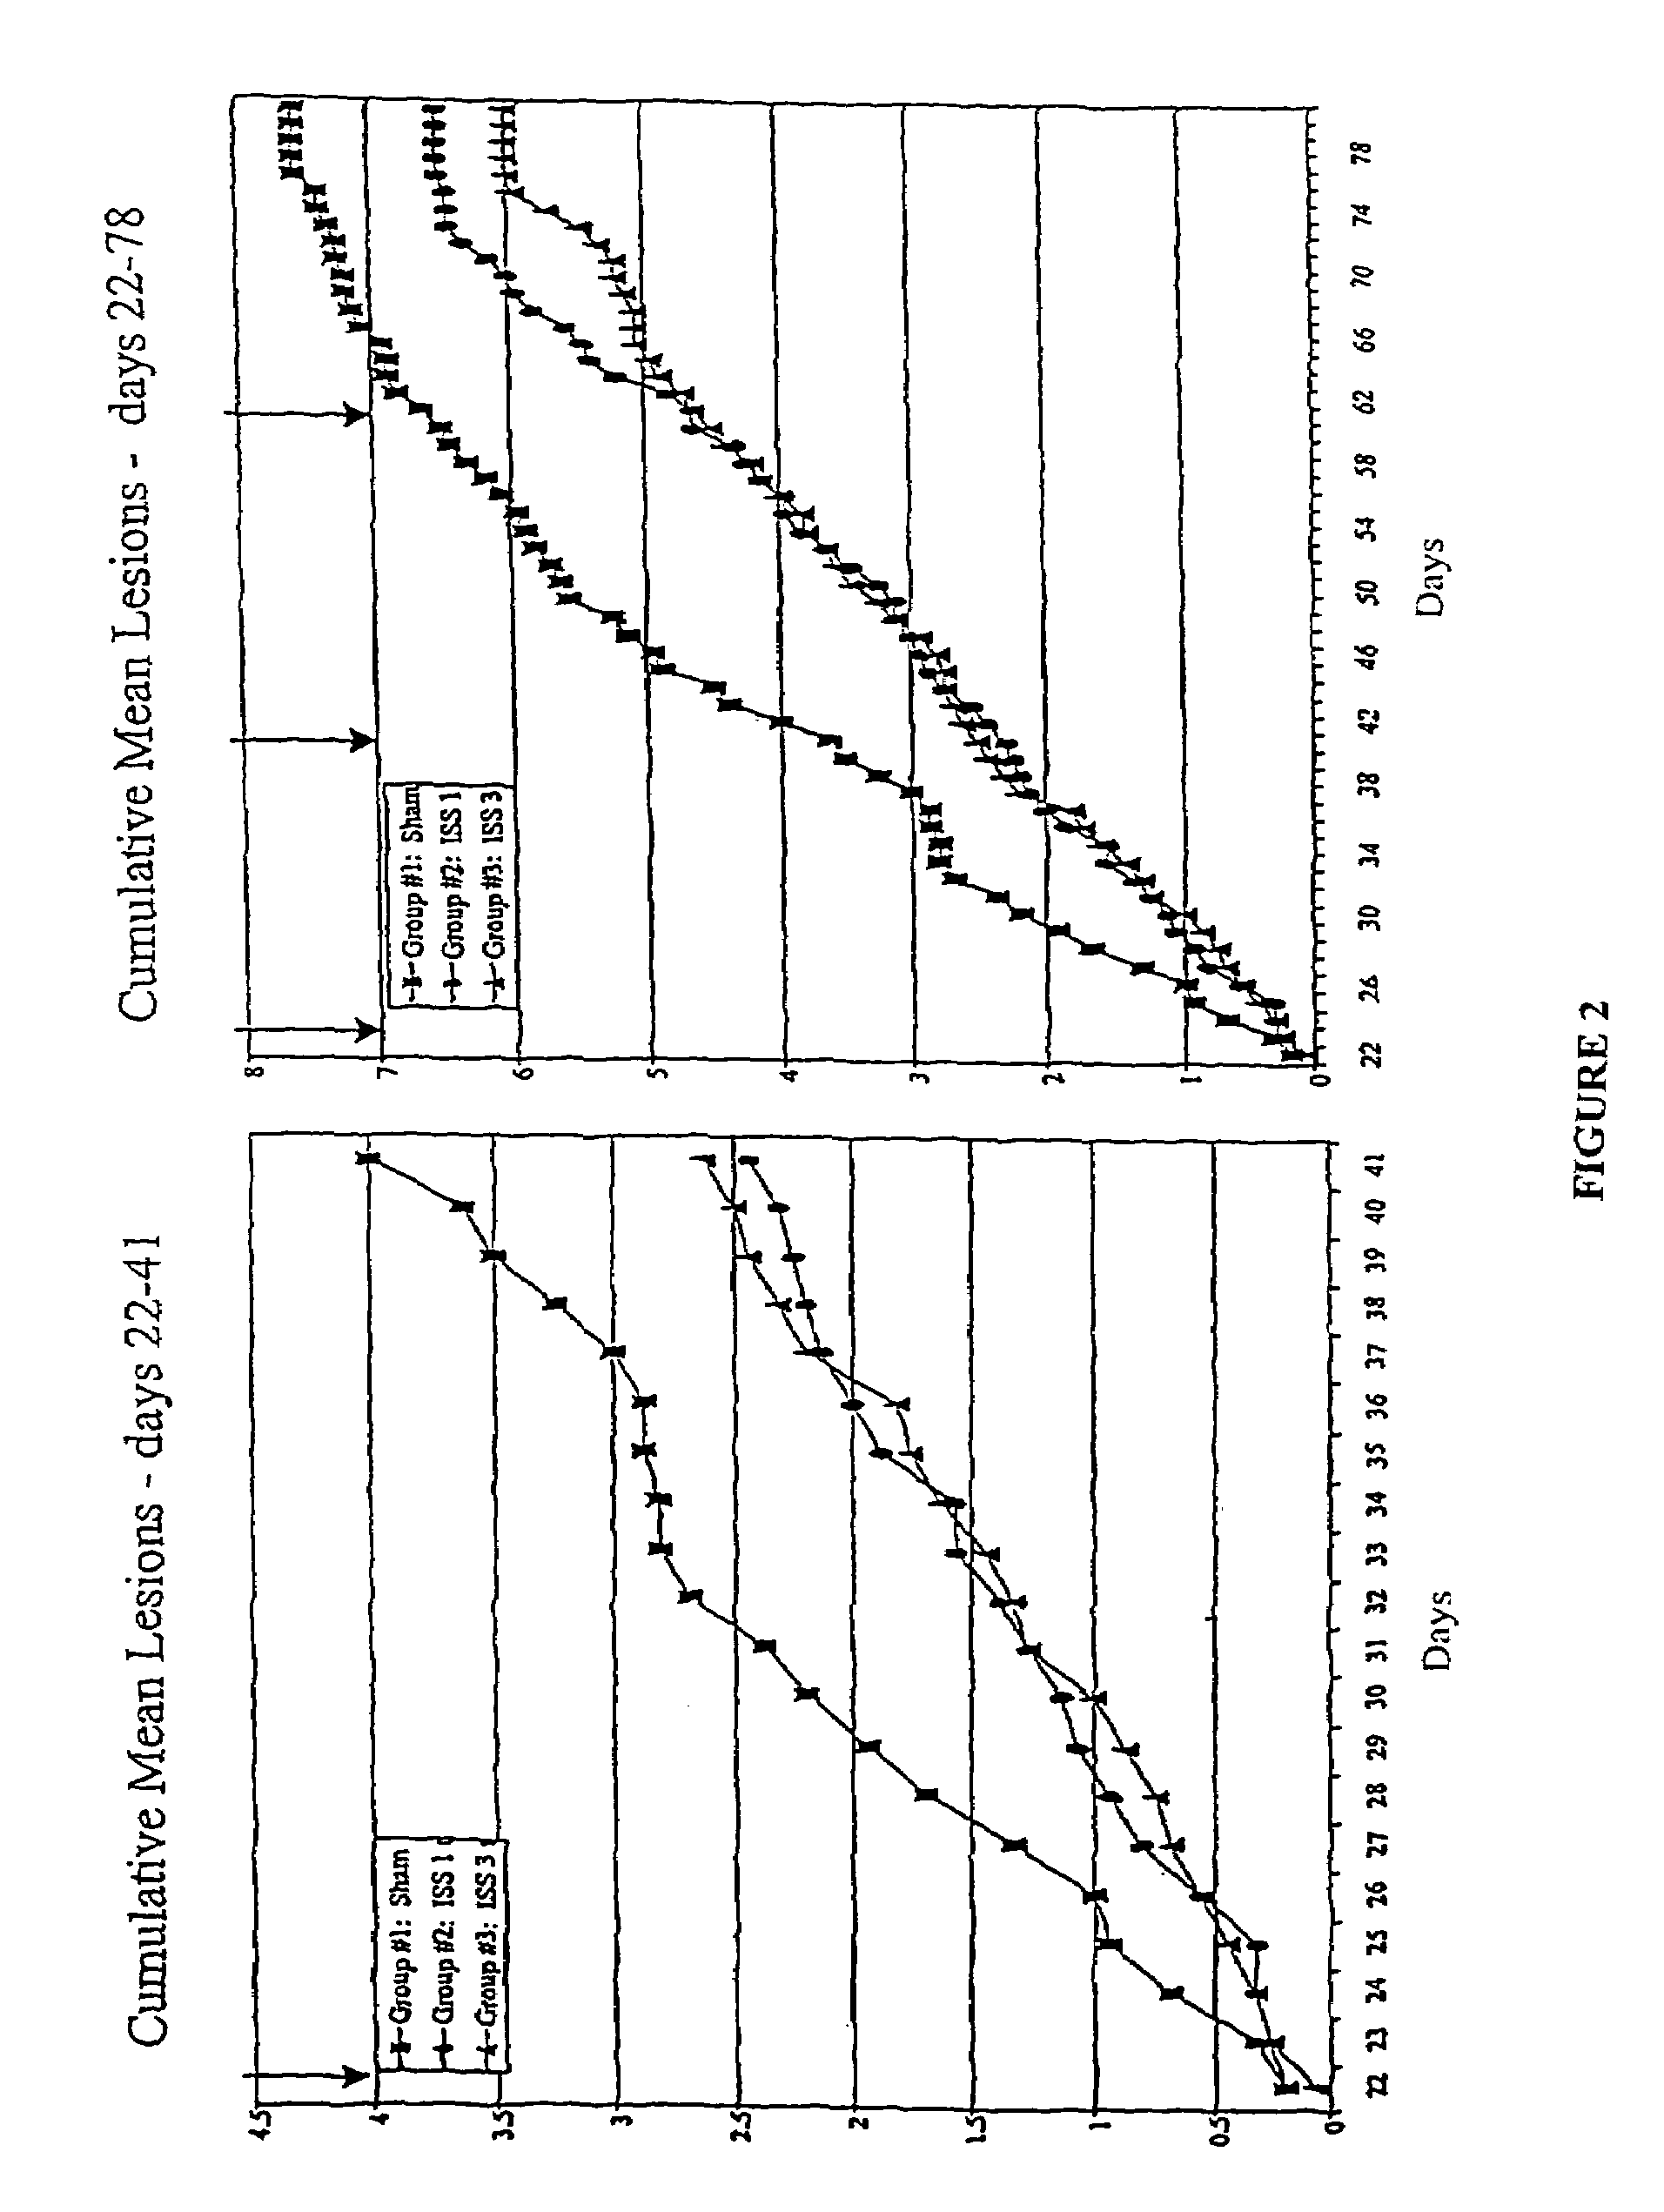 Methods of ameliorating symptoms of herpes infection using immunomodulatory polynucleotide sequences